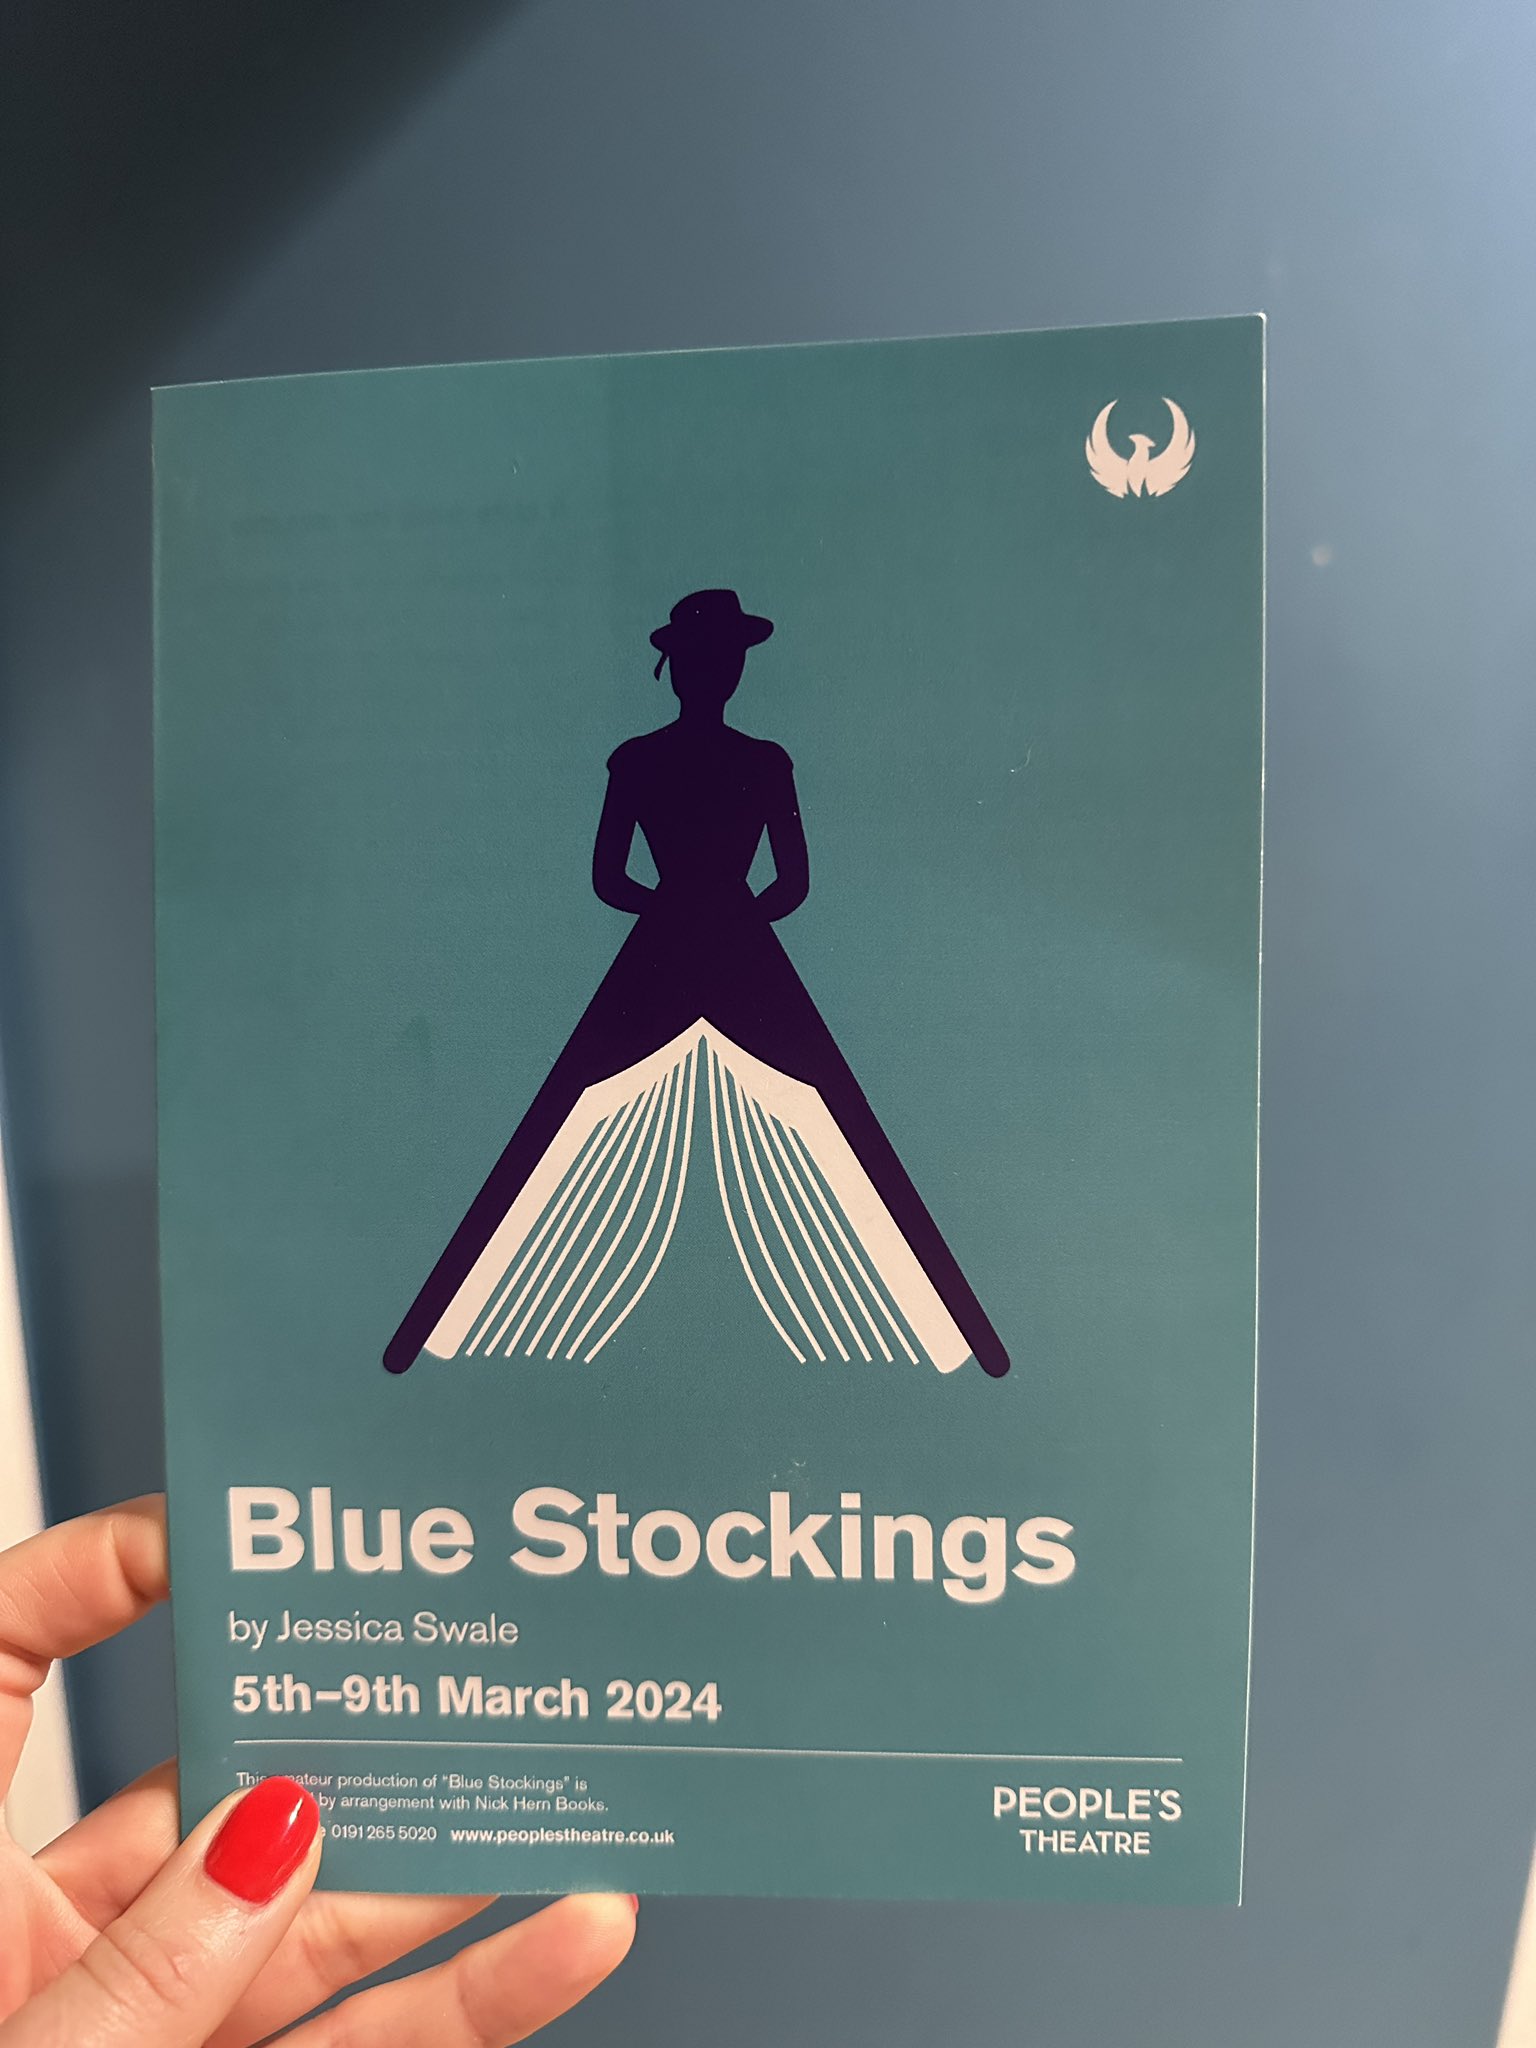 Nick Hern Books  Blue Stockings, By Jessica Swale